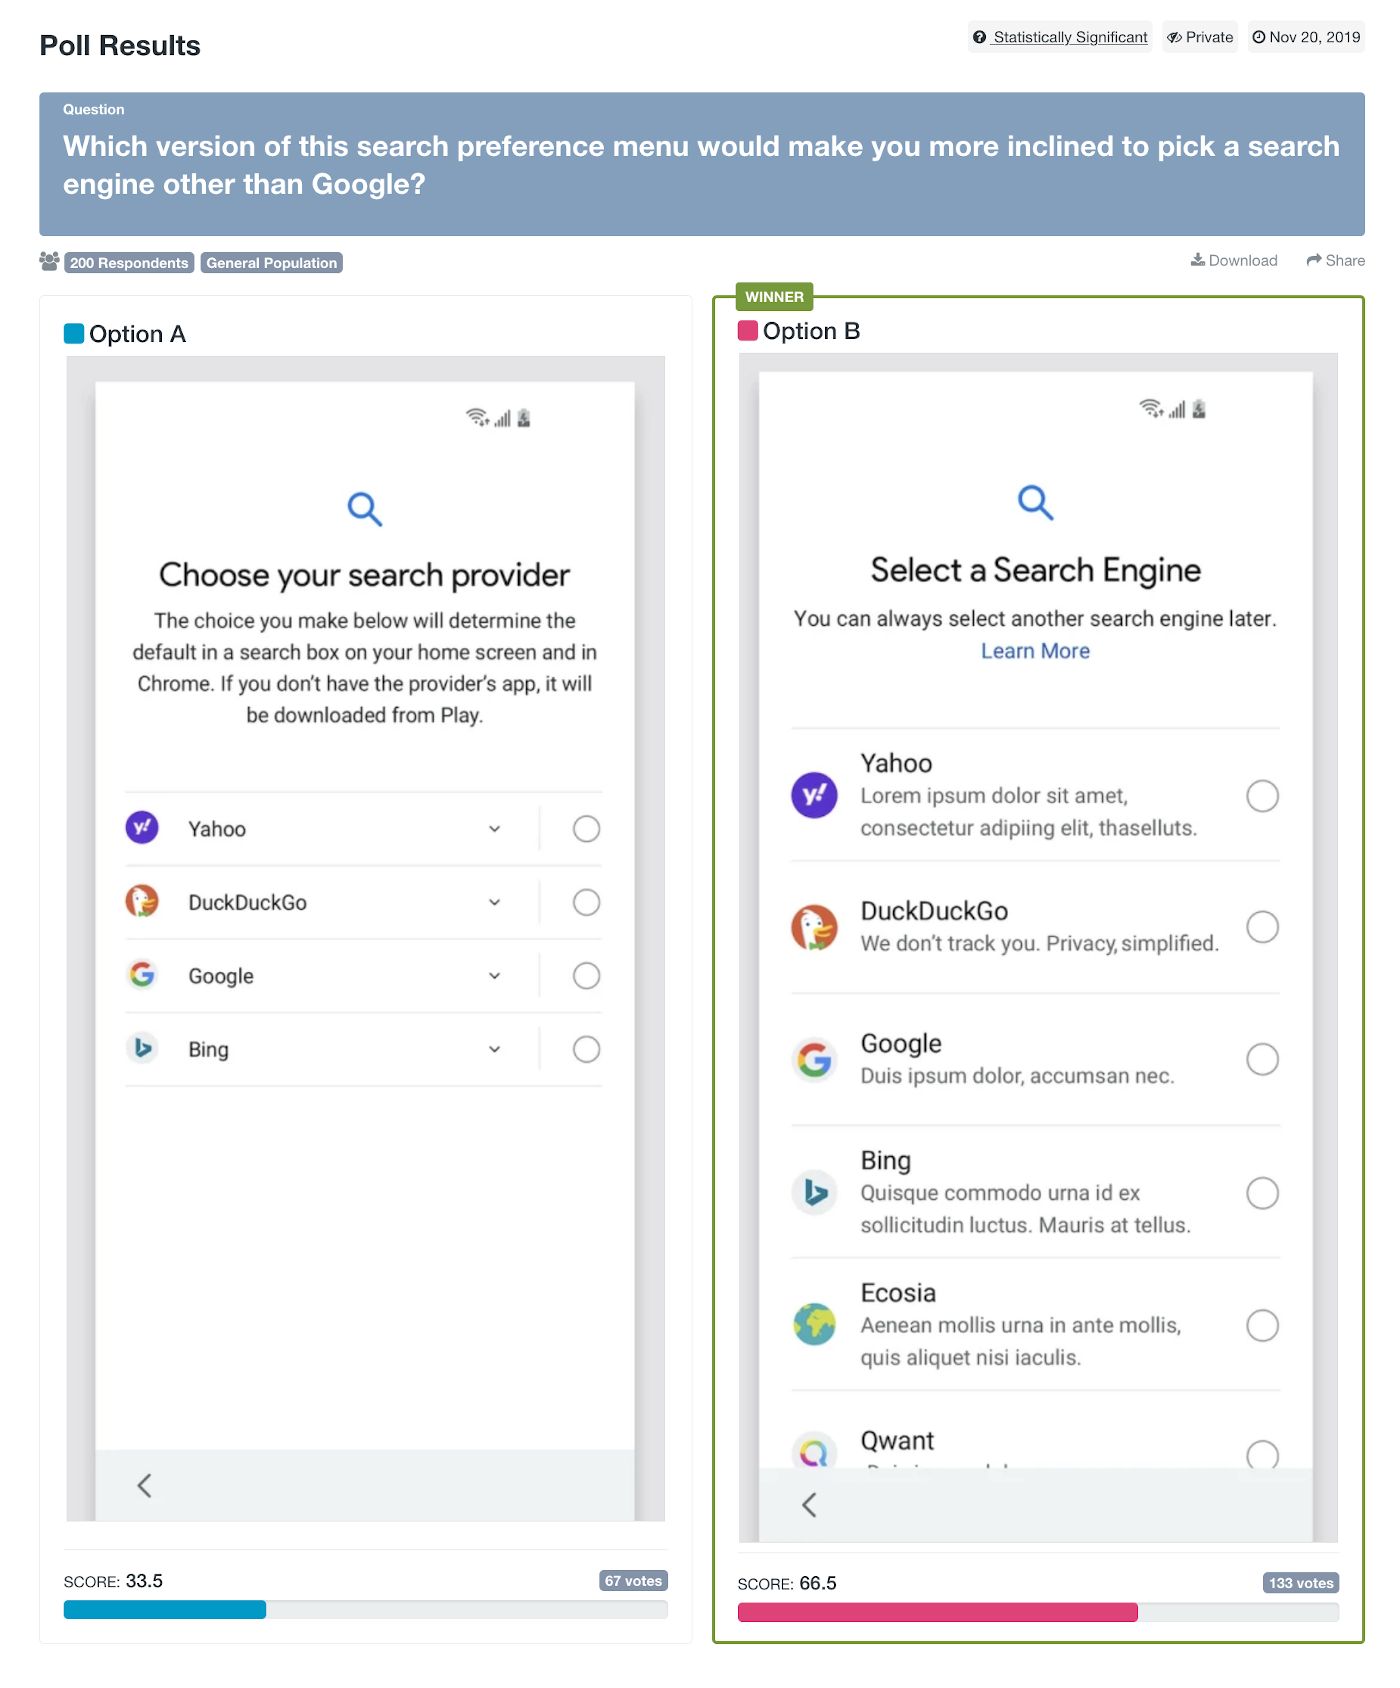 Screenshot showing user testing results of the original preference menu and the proposed menu by DuckDuckGo.